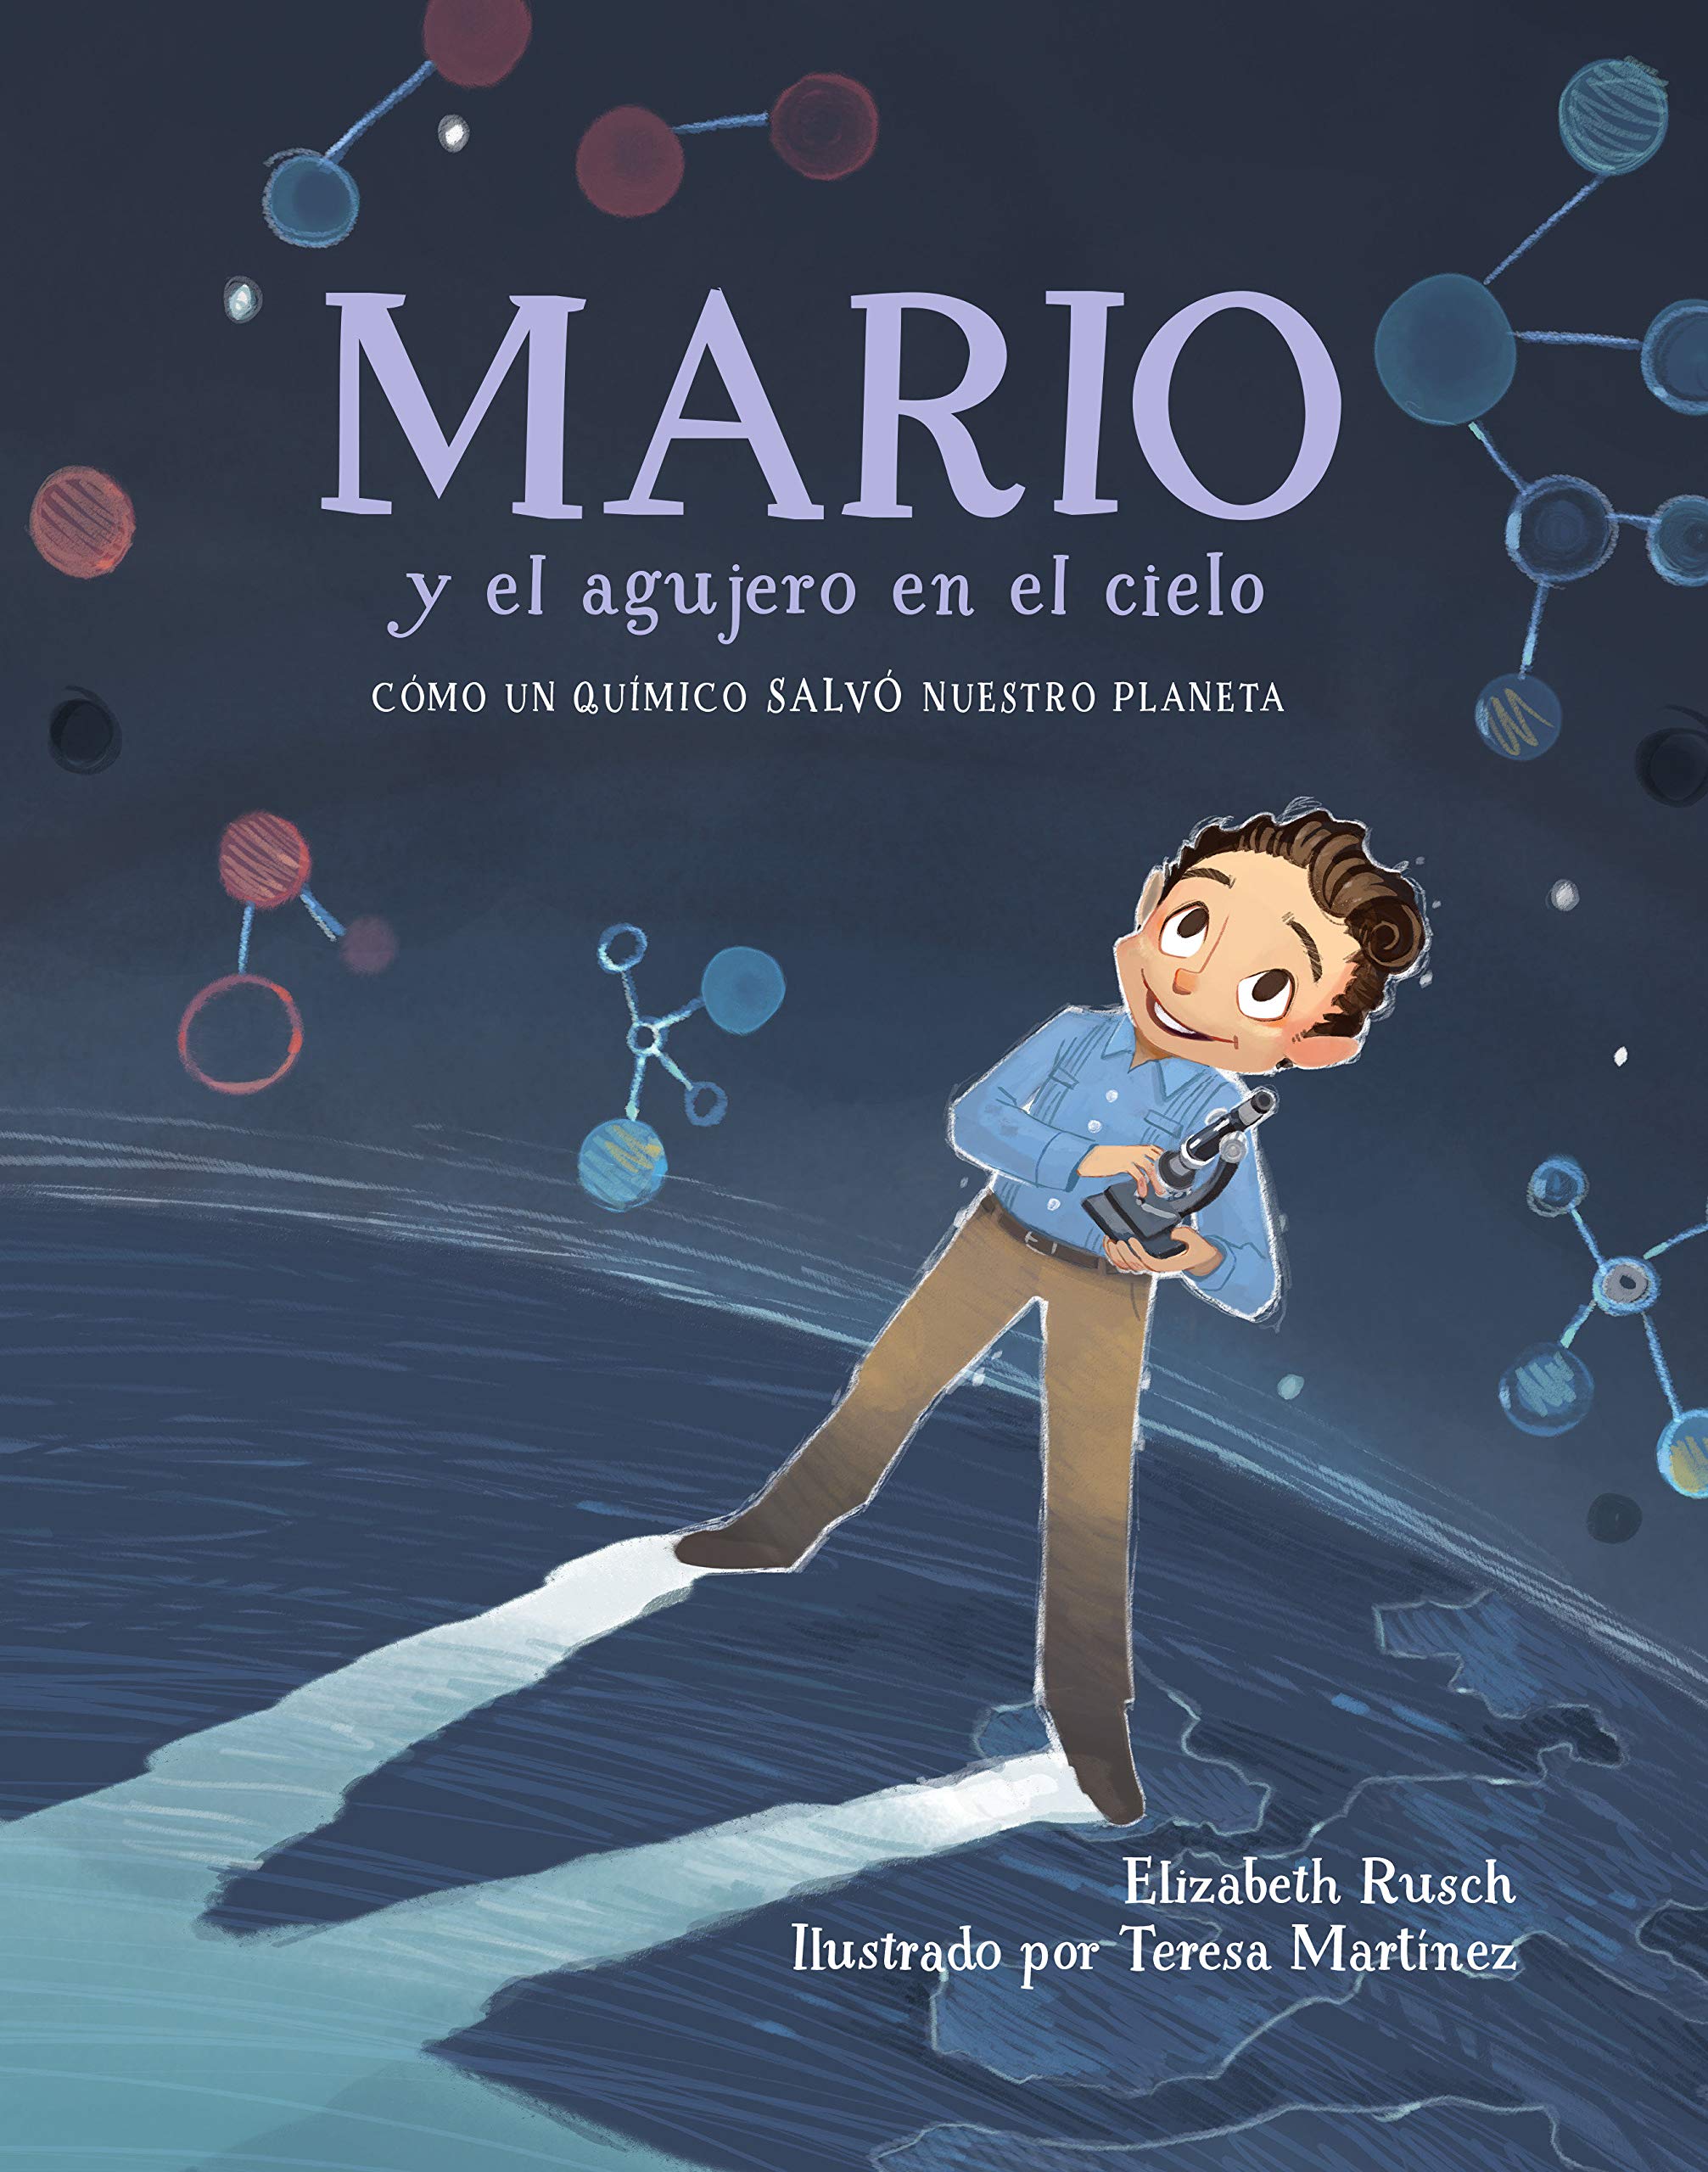 Cover of the book Mario y el Agujero en el Cielo. Features Mario as a young child holding a microscope and staring at a sky filled with molecules.